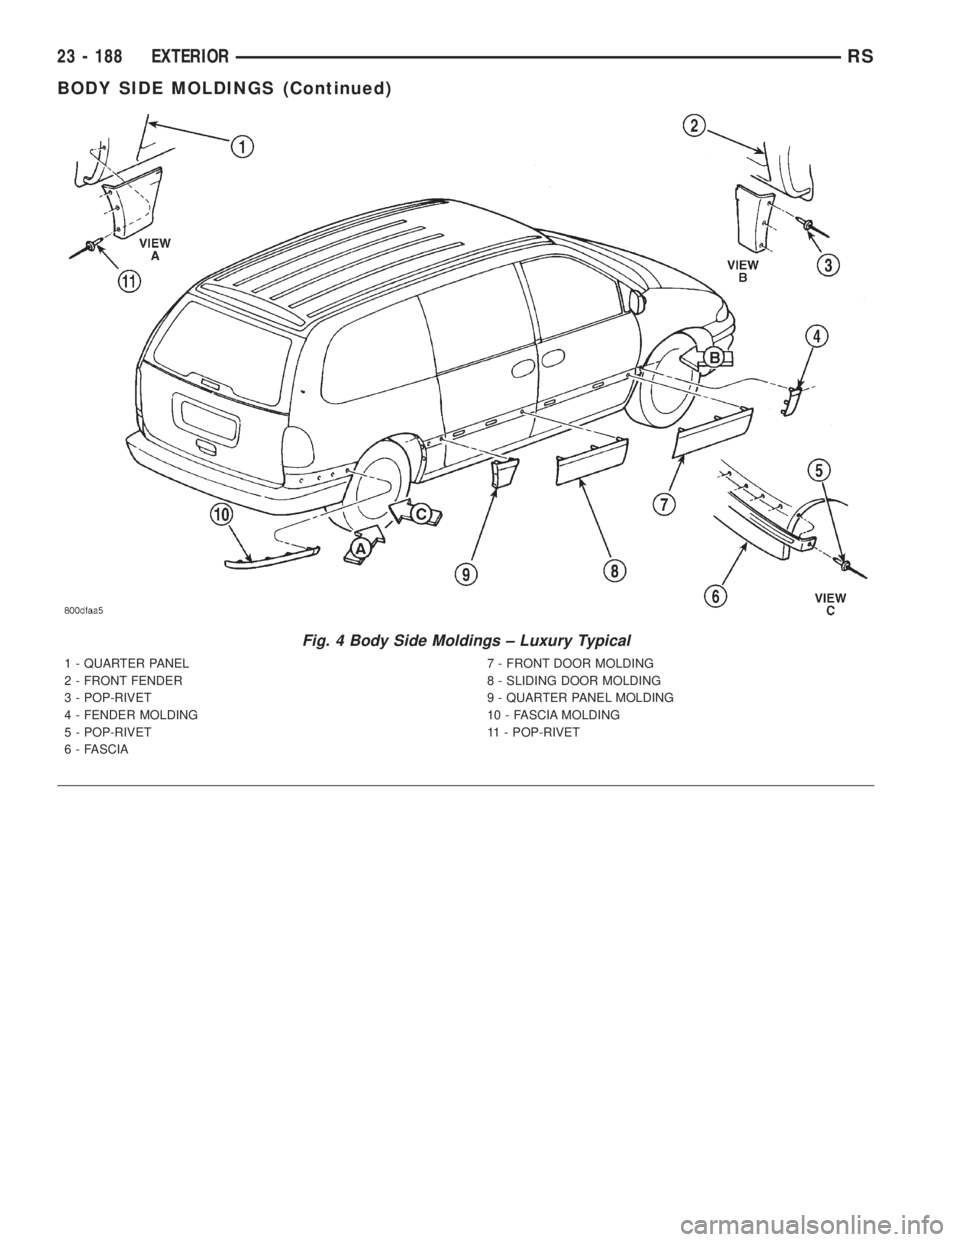 CHRYSLER VOYAGER 2001  Service Manual Fig. 4 Body Side Moldings ± Luxury Typical
1 - QUARTER PANEL
2 - FRONT FENDER
3 - POP-RIVET
4 - FENDER MOLDING
5 - POP-RIVET
6 - FASCIA7 - FRONT DOOR MOLDING
8 - SLIDING DOOR MOLDING
9 - QUARTER PANE